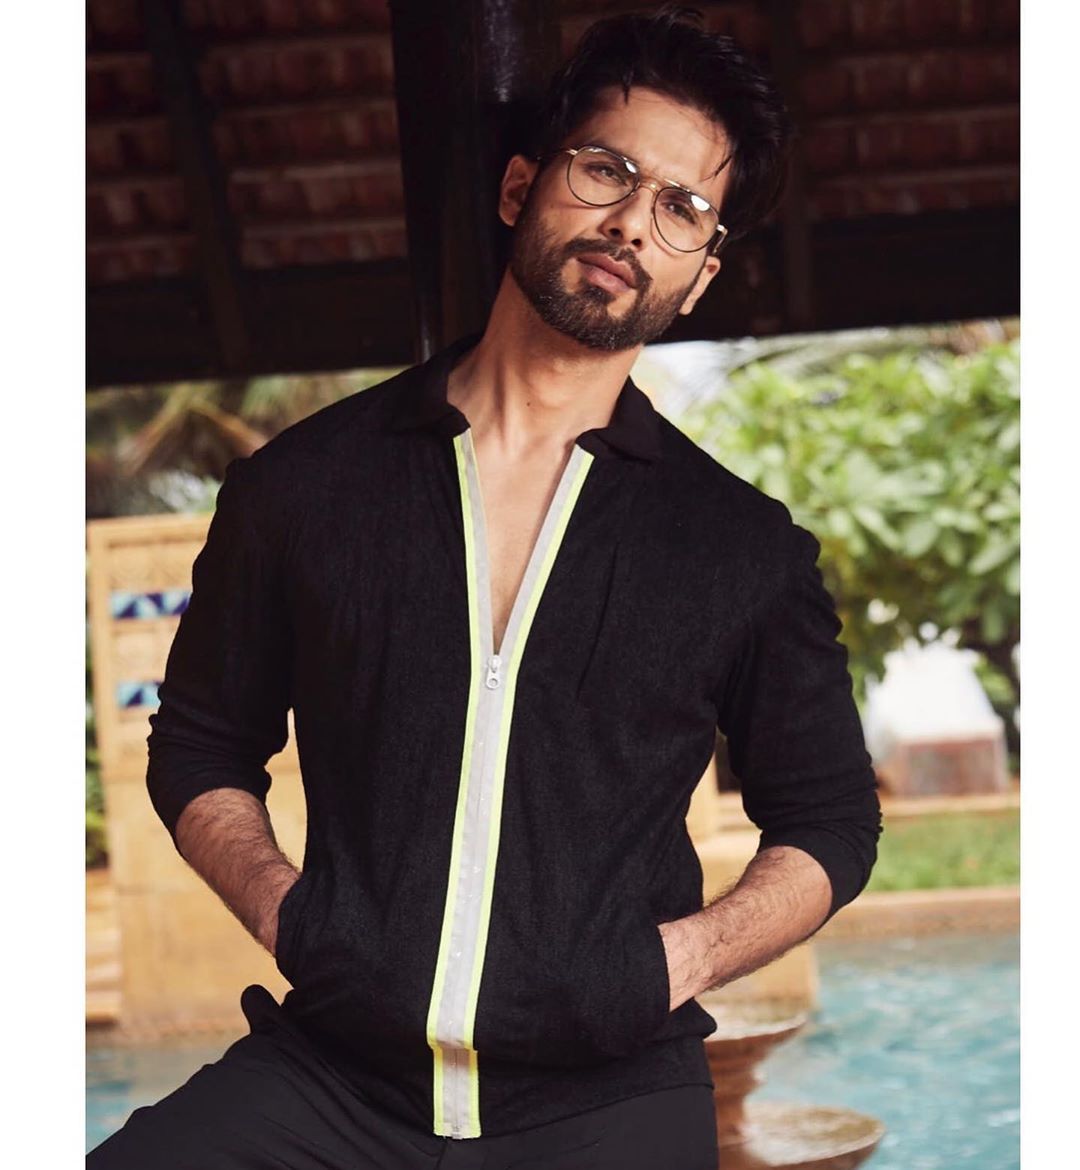 Shahid Kapoor Doesn't Want To Manipulate Audiences To Like Him: If They Don't Like Me Certain Times, I Take It As A Compliment